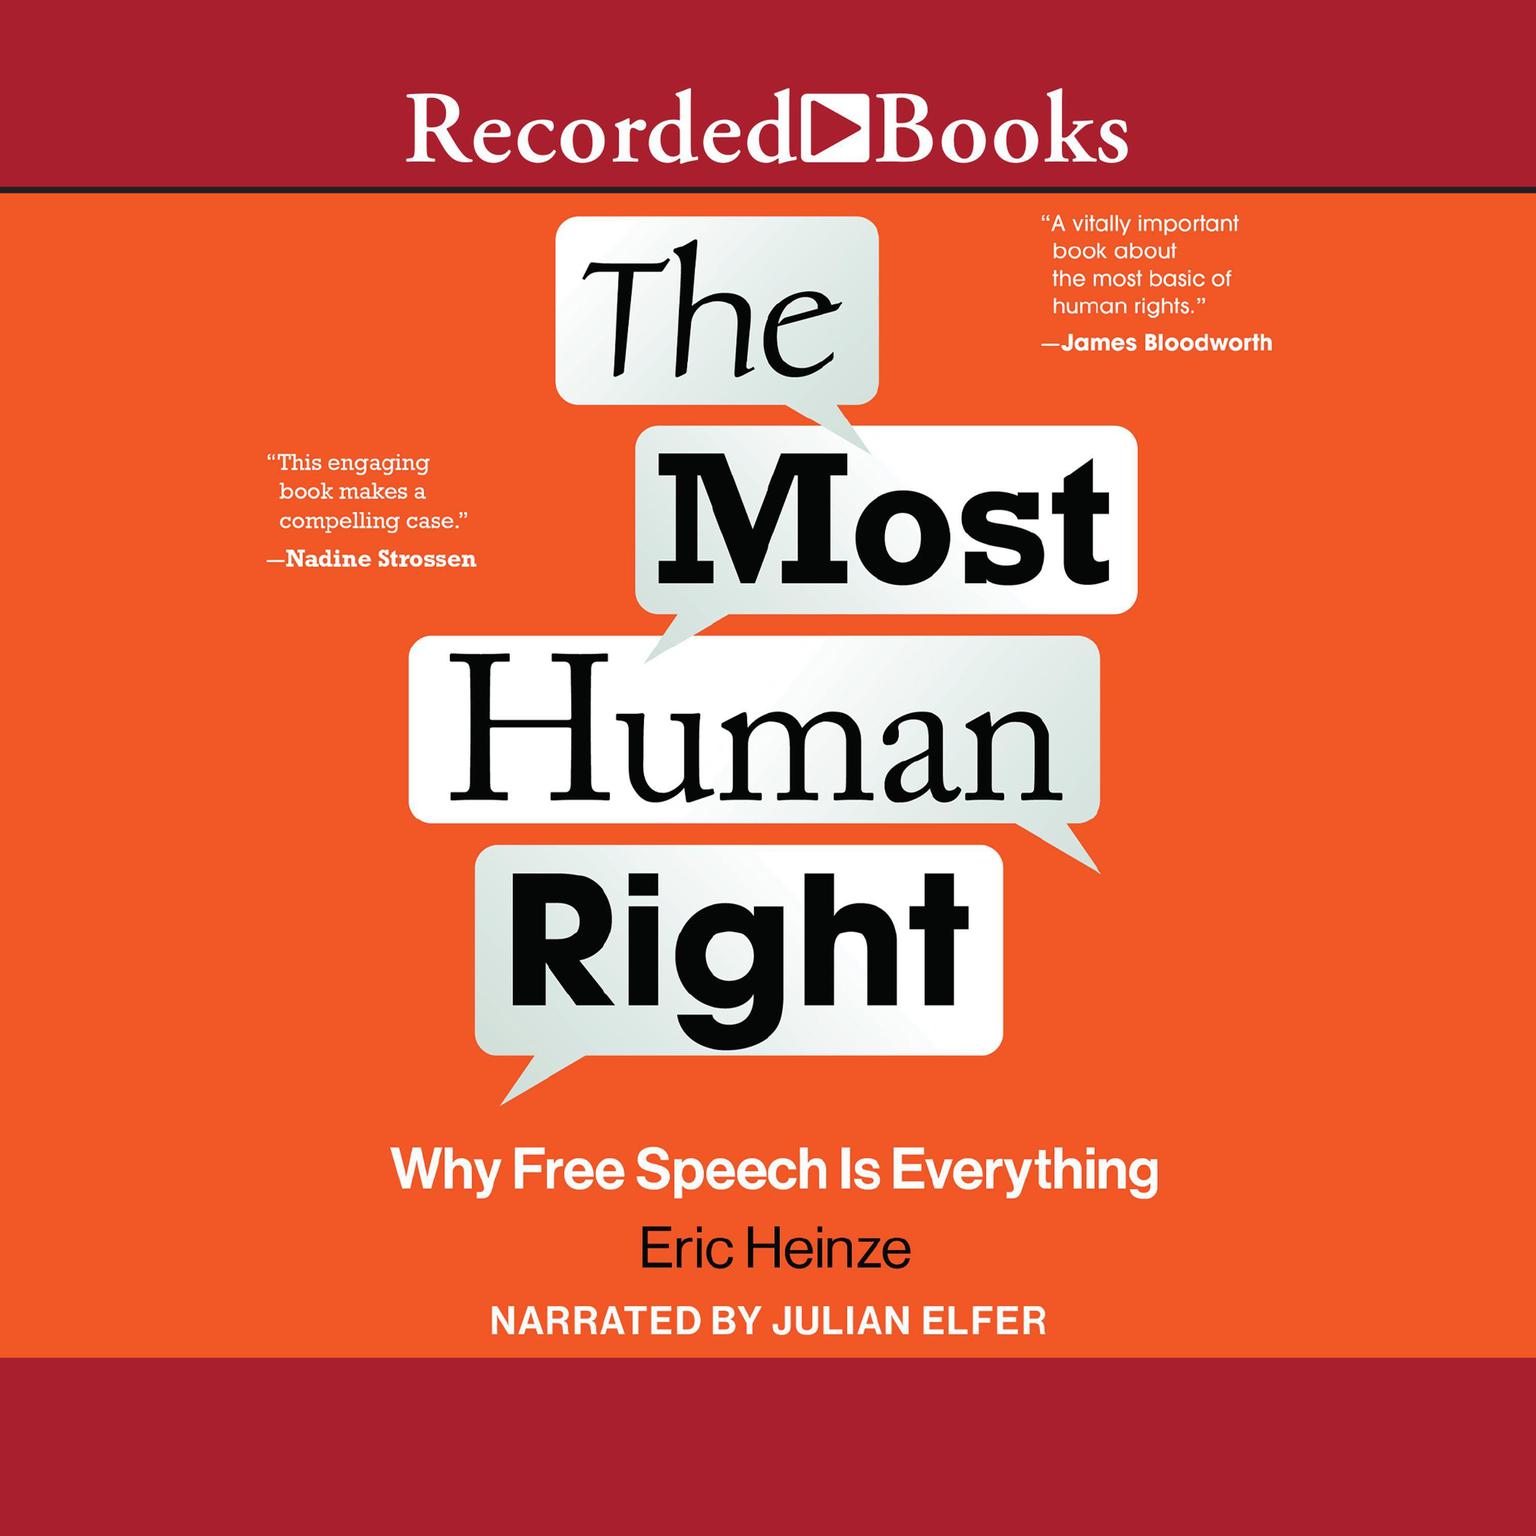 The Most Human Right: Why Free Speech is Everything Audiobook, by Eric Heinze